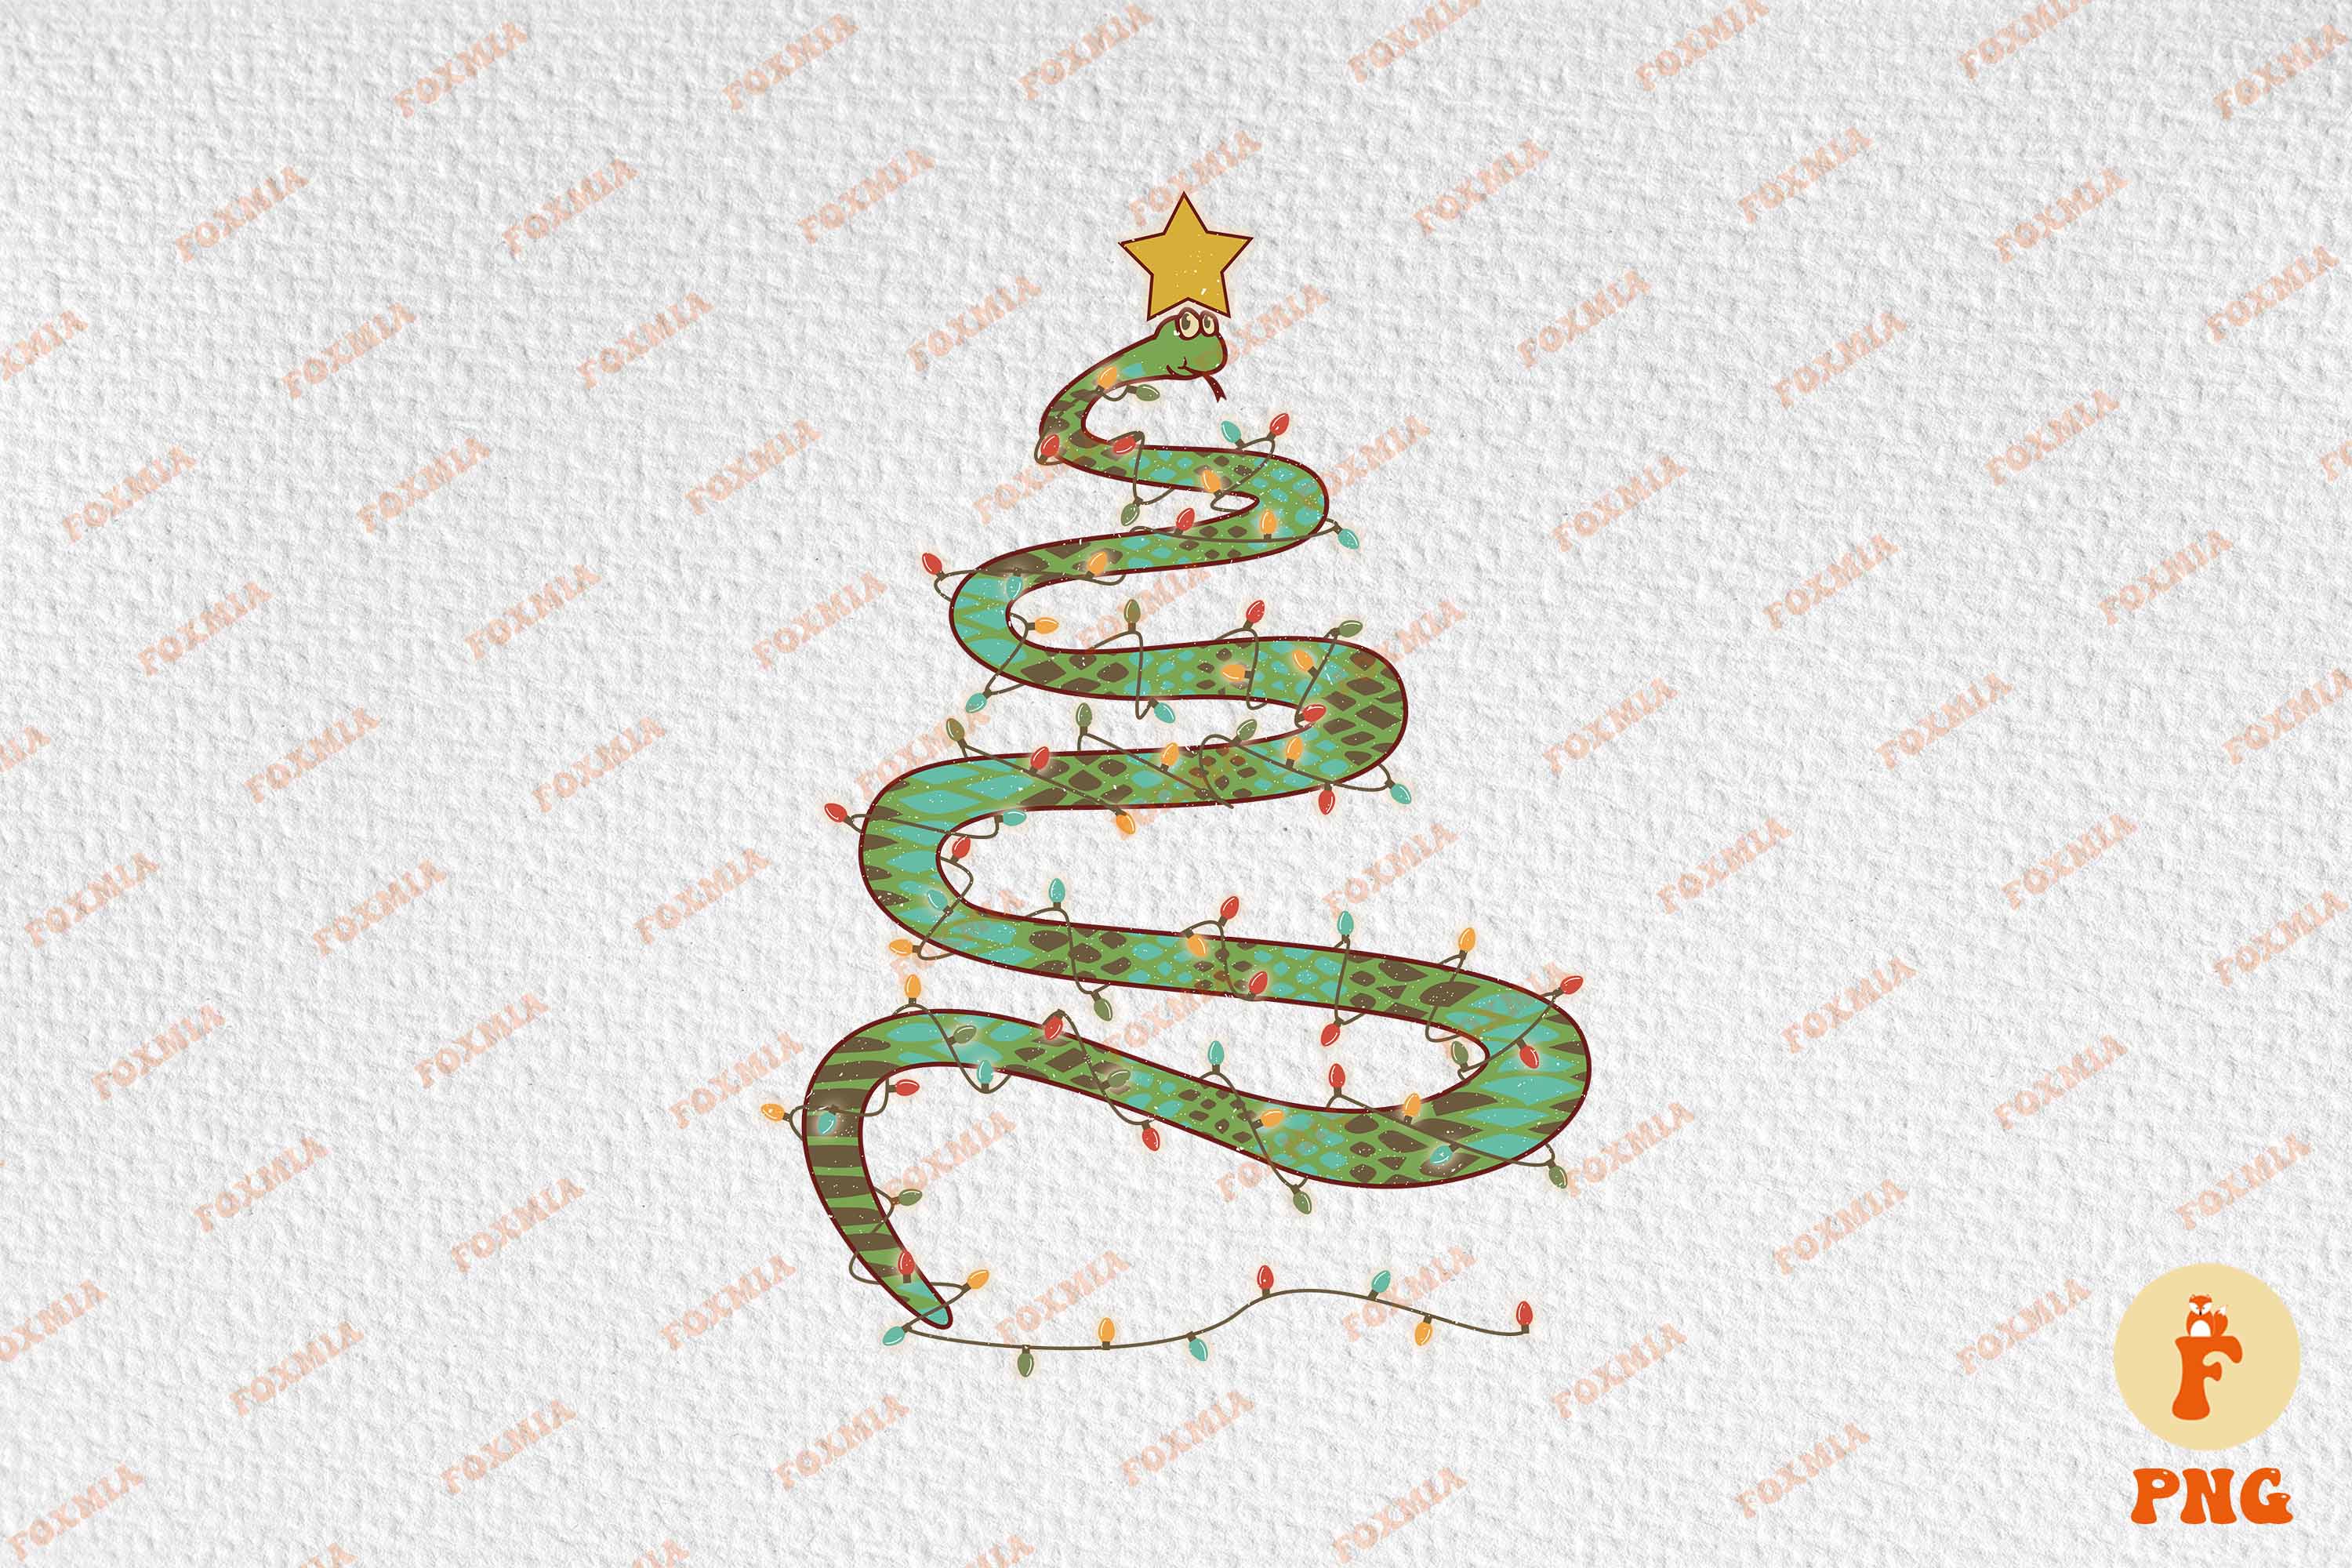 A wonderful image with a snake in the form of a Christmas tree.